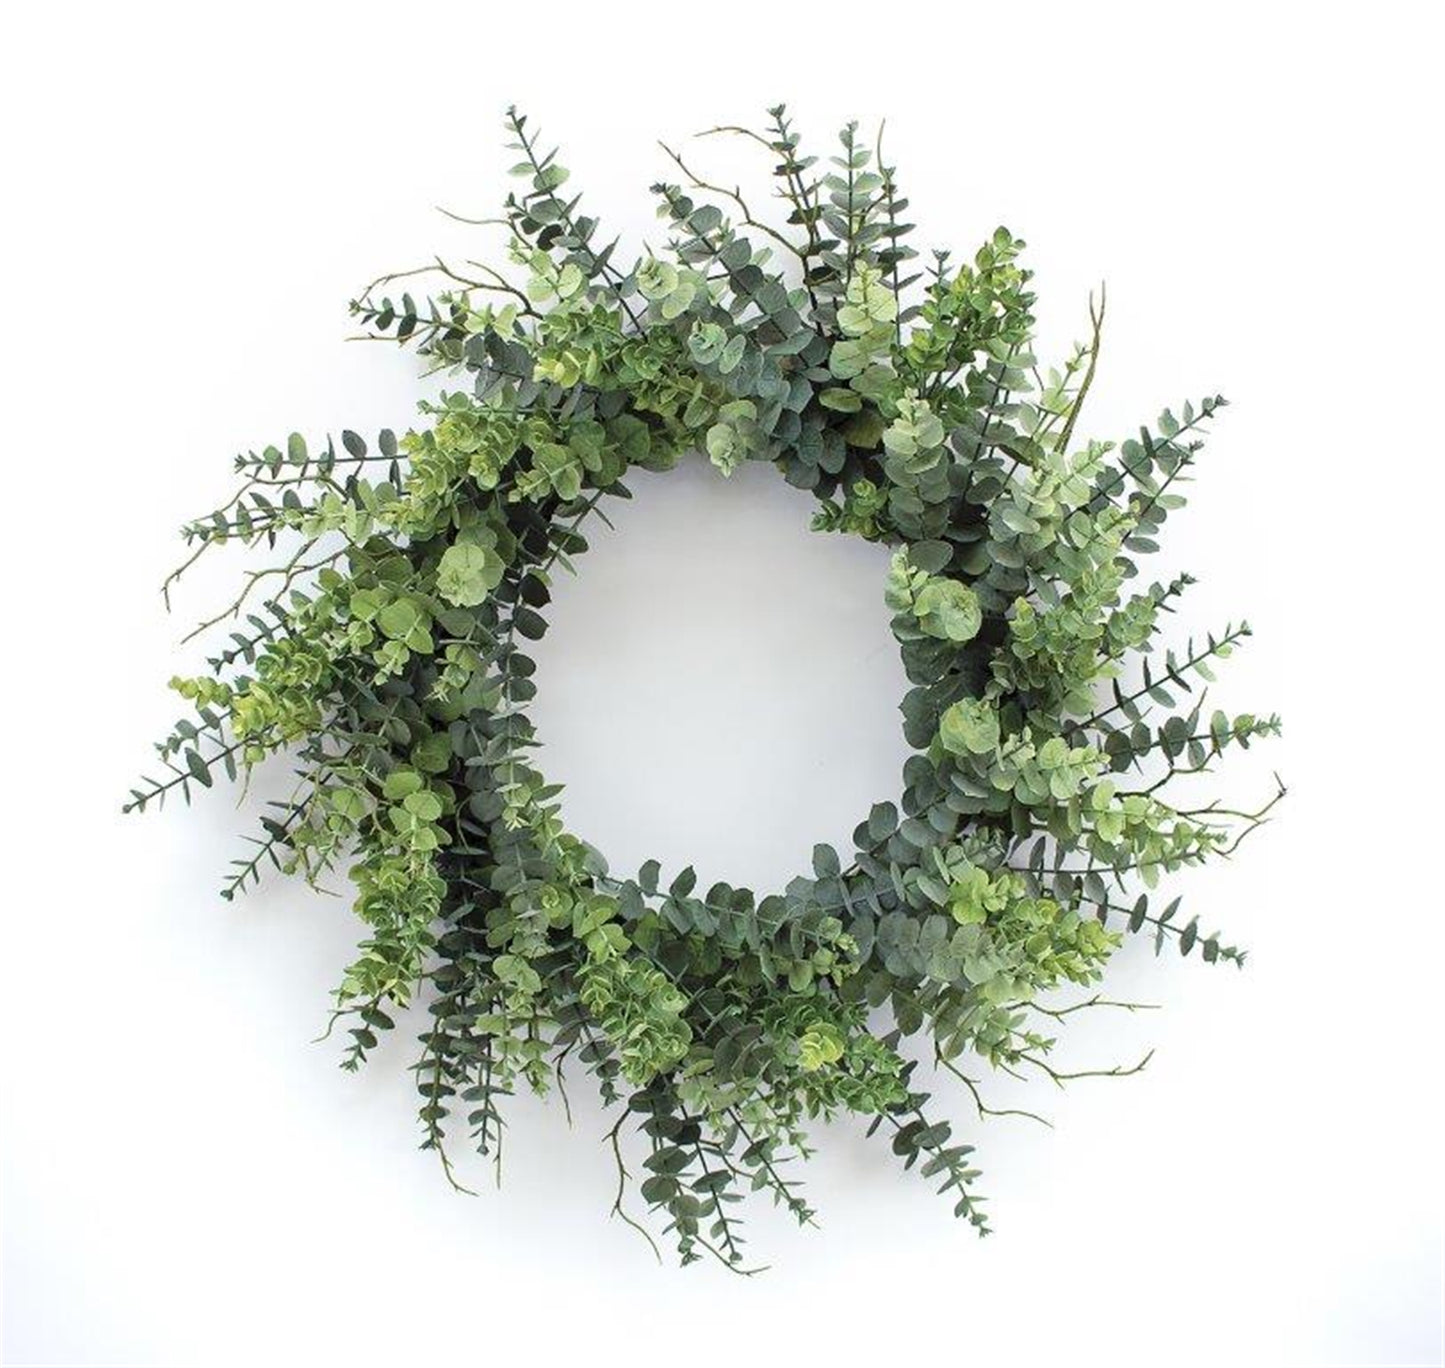 Mixed Eucalyptus Leaf Foliage Wreath with Twig Accents 29"D